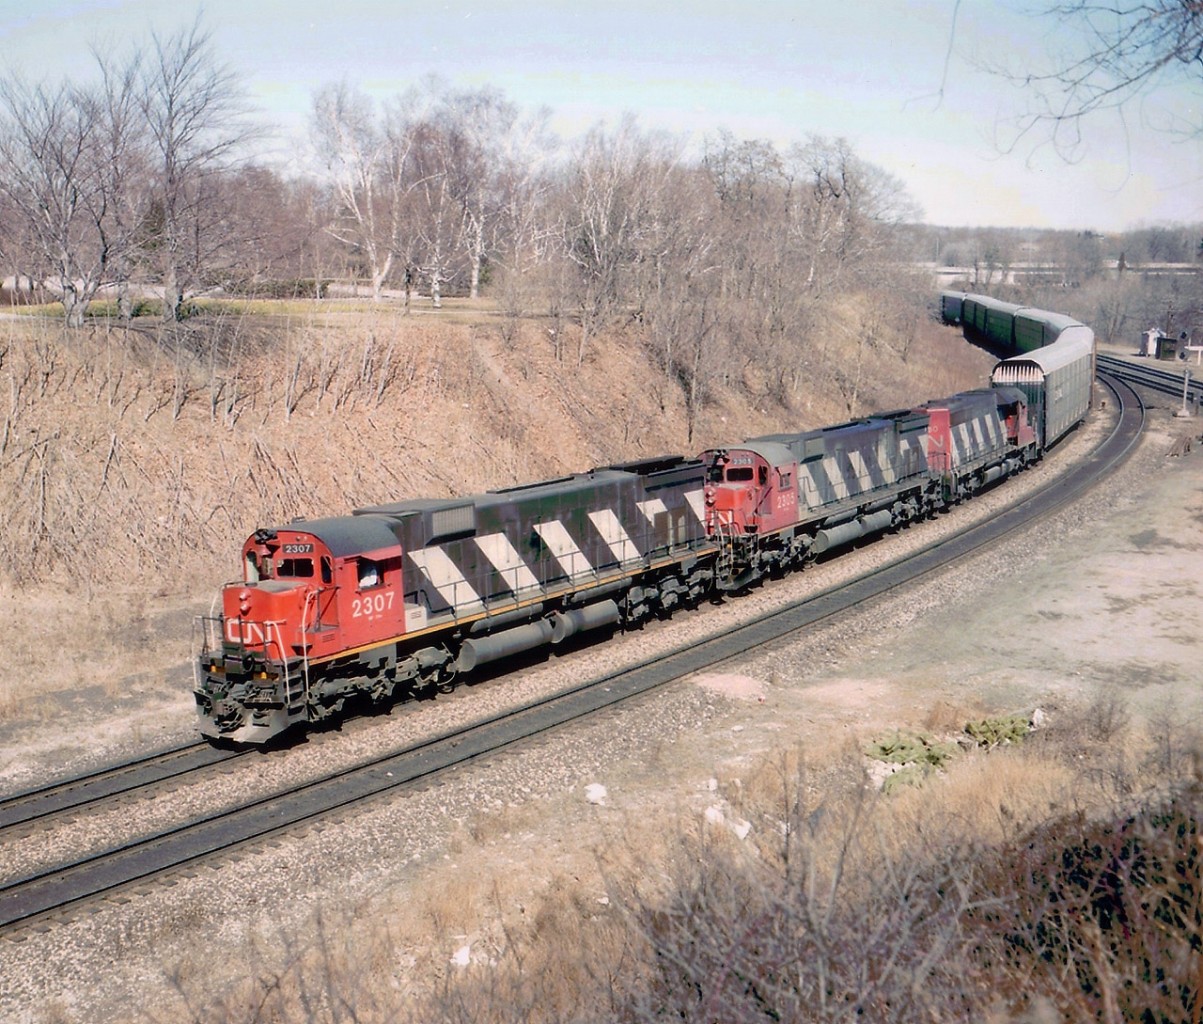 A day at Bayview as it used to be: No fences, no hassles, and this particular day, no fans, either. Except this one. And the reward was this westbound with a pair of M-636s up front, CN 2307 and 2305, both off the roster for 20 years now. Trailing is a puny SD-40 # 5080, and since they are all off the CN roster as well, I guess we can tolerate it. I went ahead of this train as far as Copetown. To hear them struggle on the grade was a real treat.